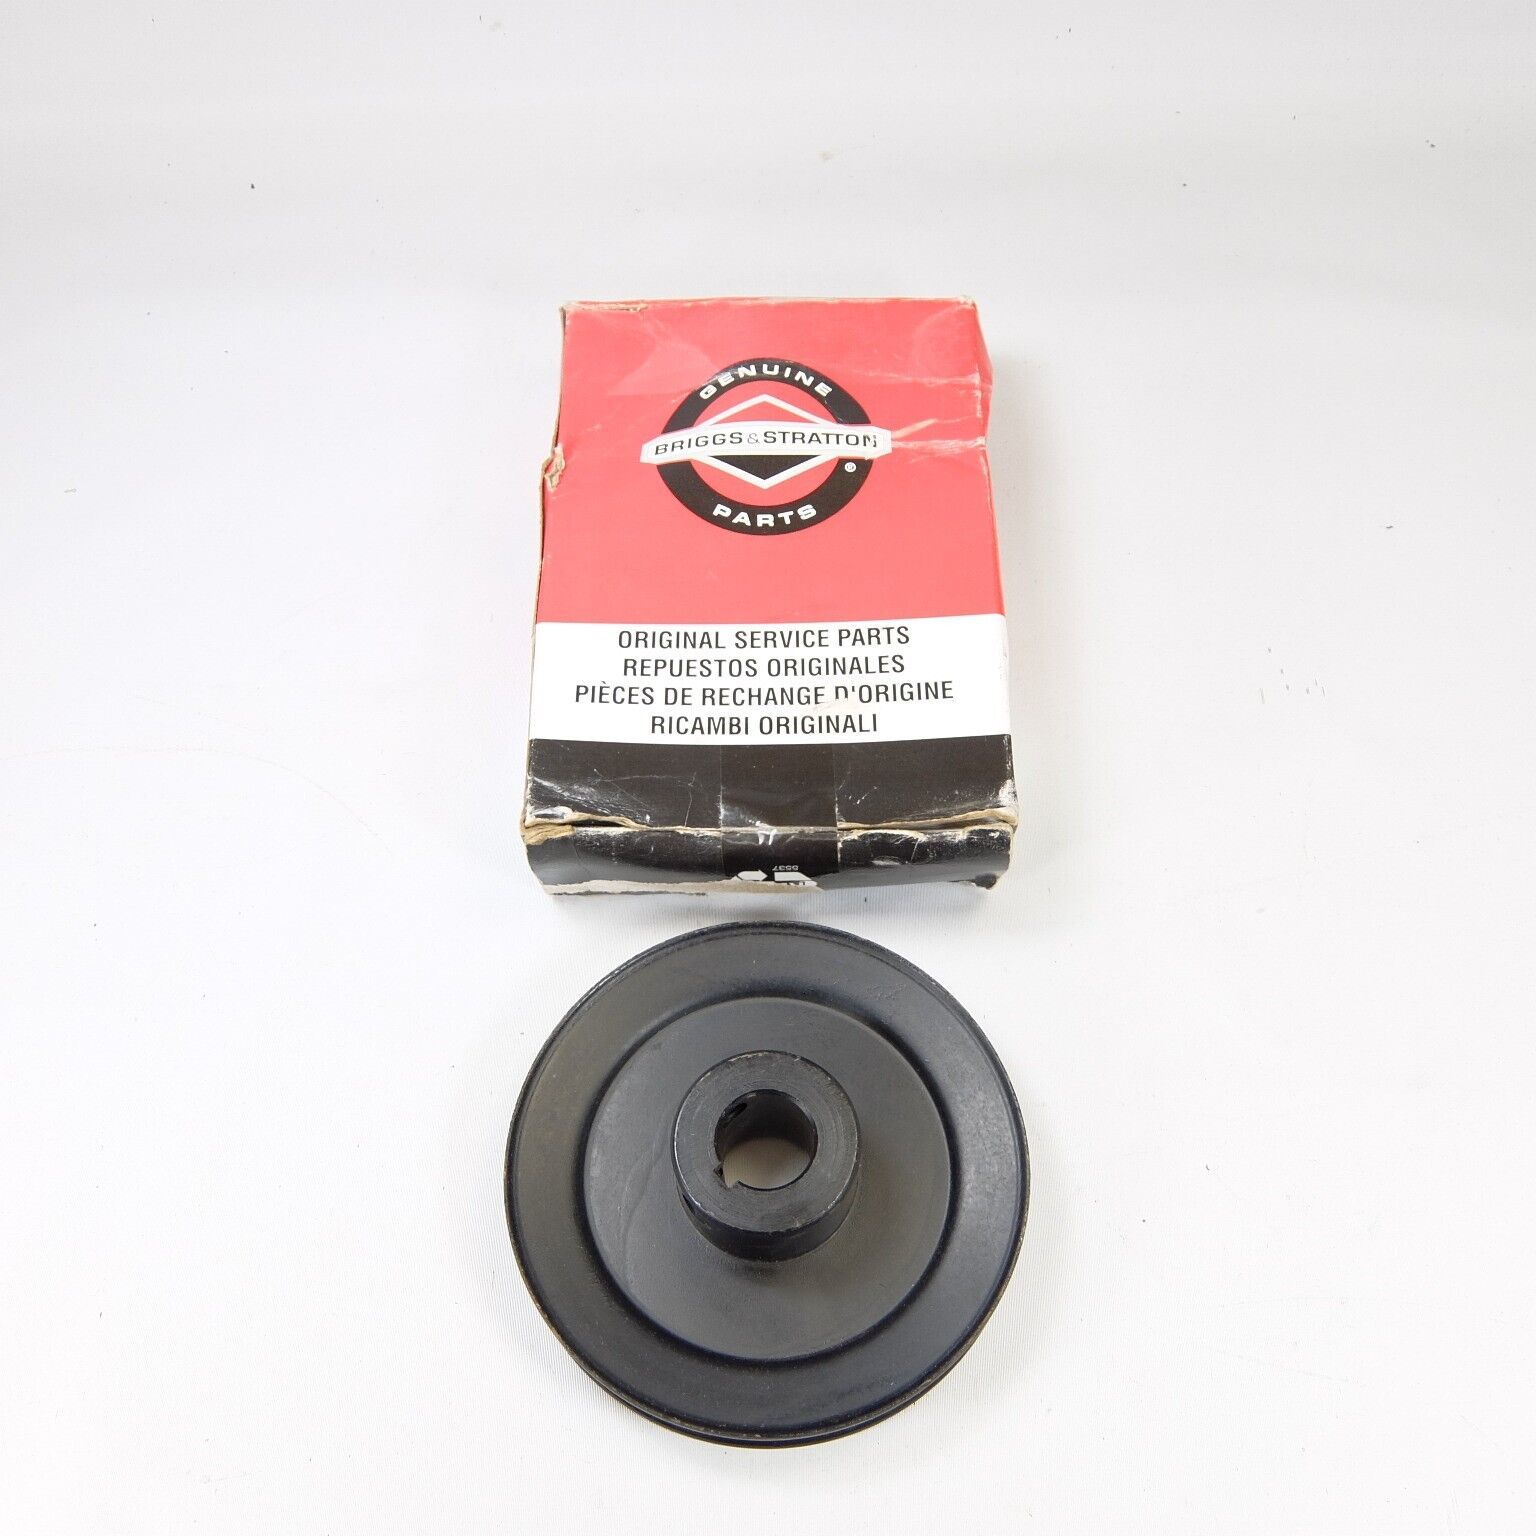 New Snapper 7023372 7023372YP Drive Shaft Pulley fits GT180H YT180H - $40.00